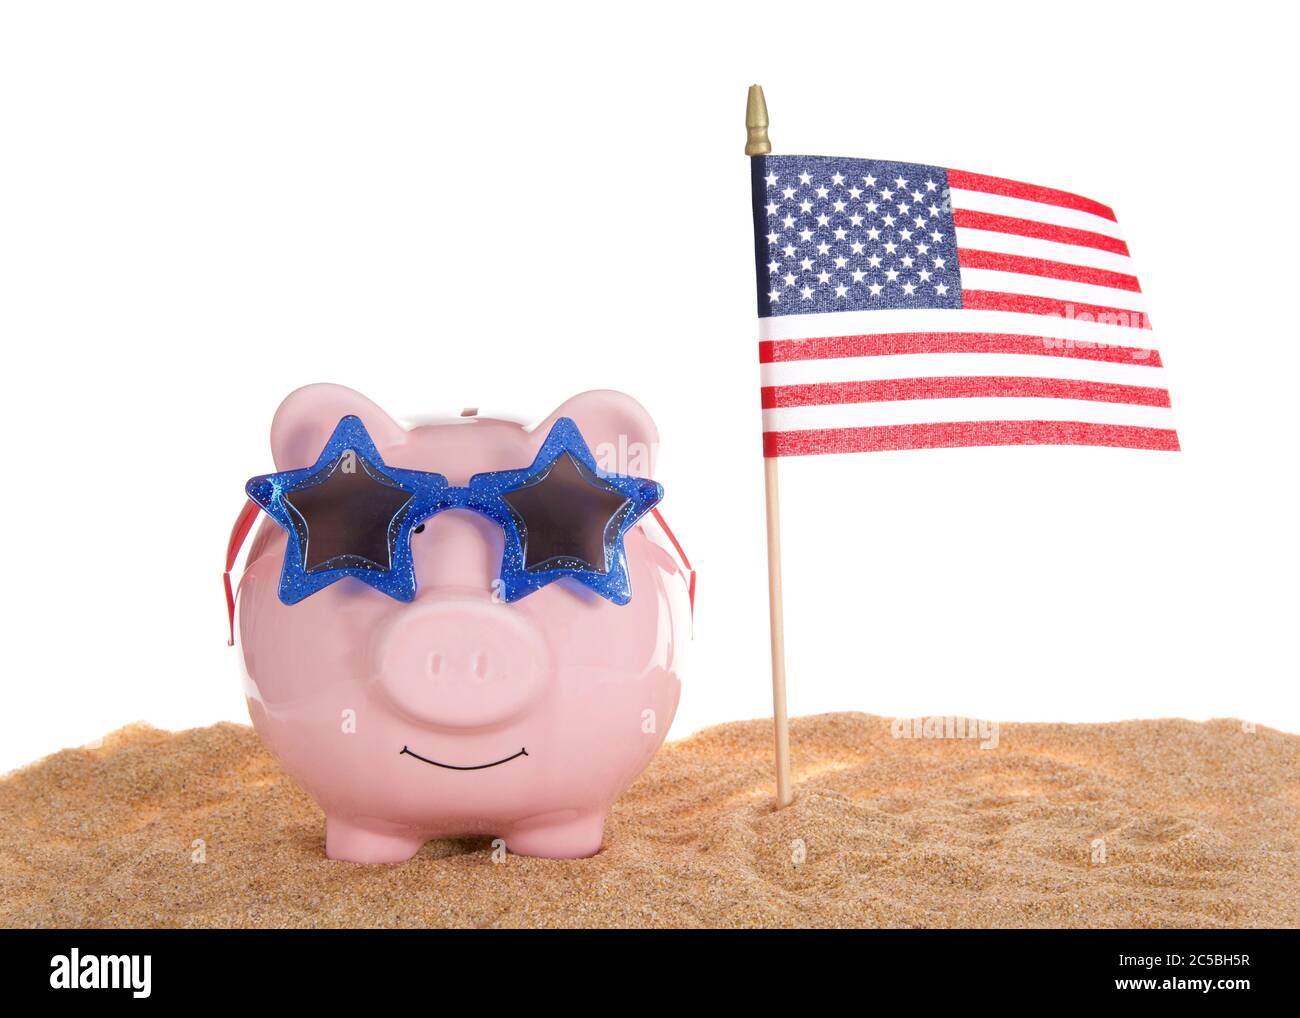 Traditional pink piggy bank wearing star glasses sitting in sand with American Flag waving, isolated on white. Stock Photo